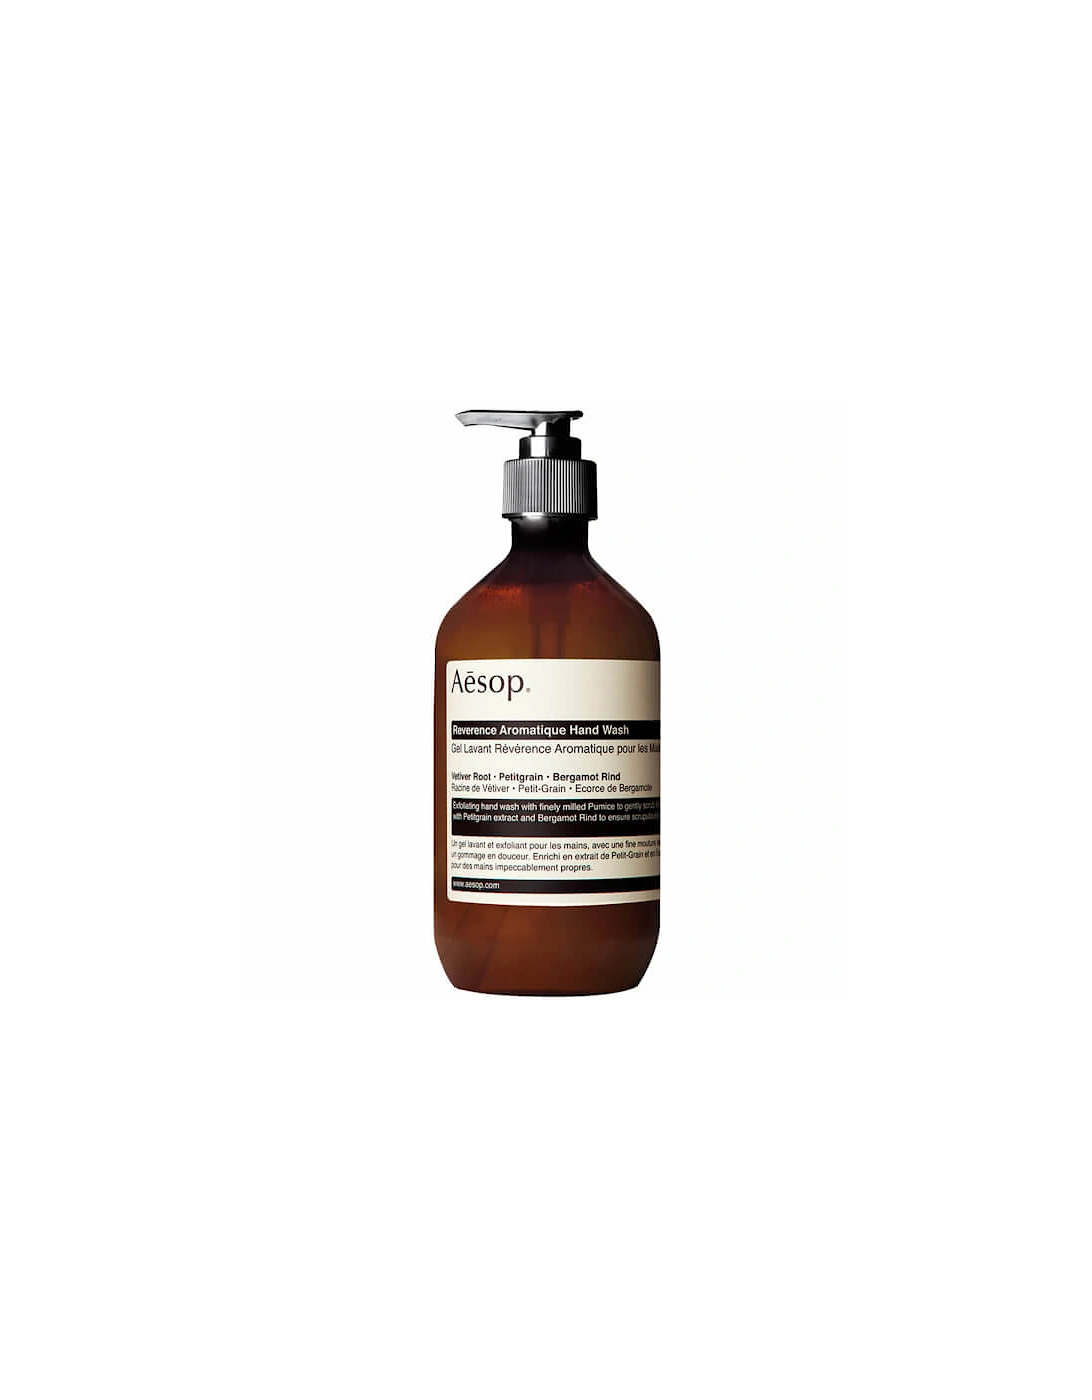 Reverence Aromatique Hand Wash 500ml - - Reverence Aromatique Hand Wash 500ml - Isabelle - Reverence Aromatique Hand Wash 500ml - X - Reverence Aromatique Hand Wash 500ml - Elvis - Reverence Aromatique Hand Wash 500ml - Cat - Reverence Aromatique Hand Wash 500ml - liz - Reverence Aromatique Hand Wash 500ml - Jd - Reverence Aromatique Hand Wash 500ml - Browny, 2 of 1